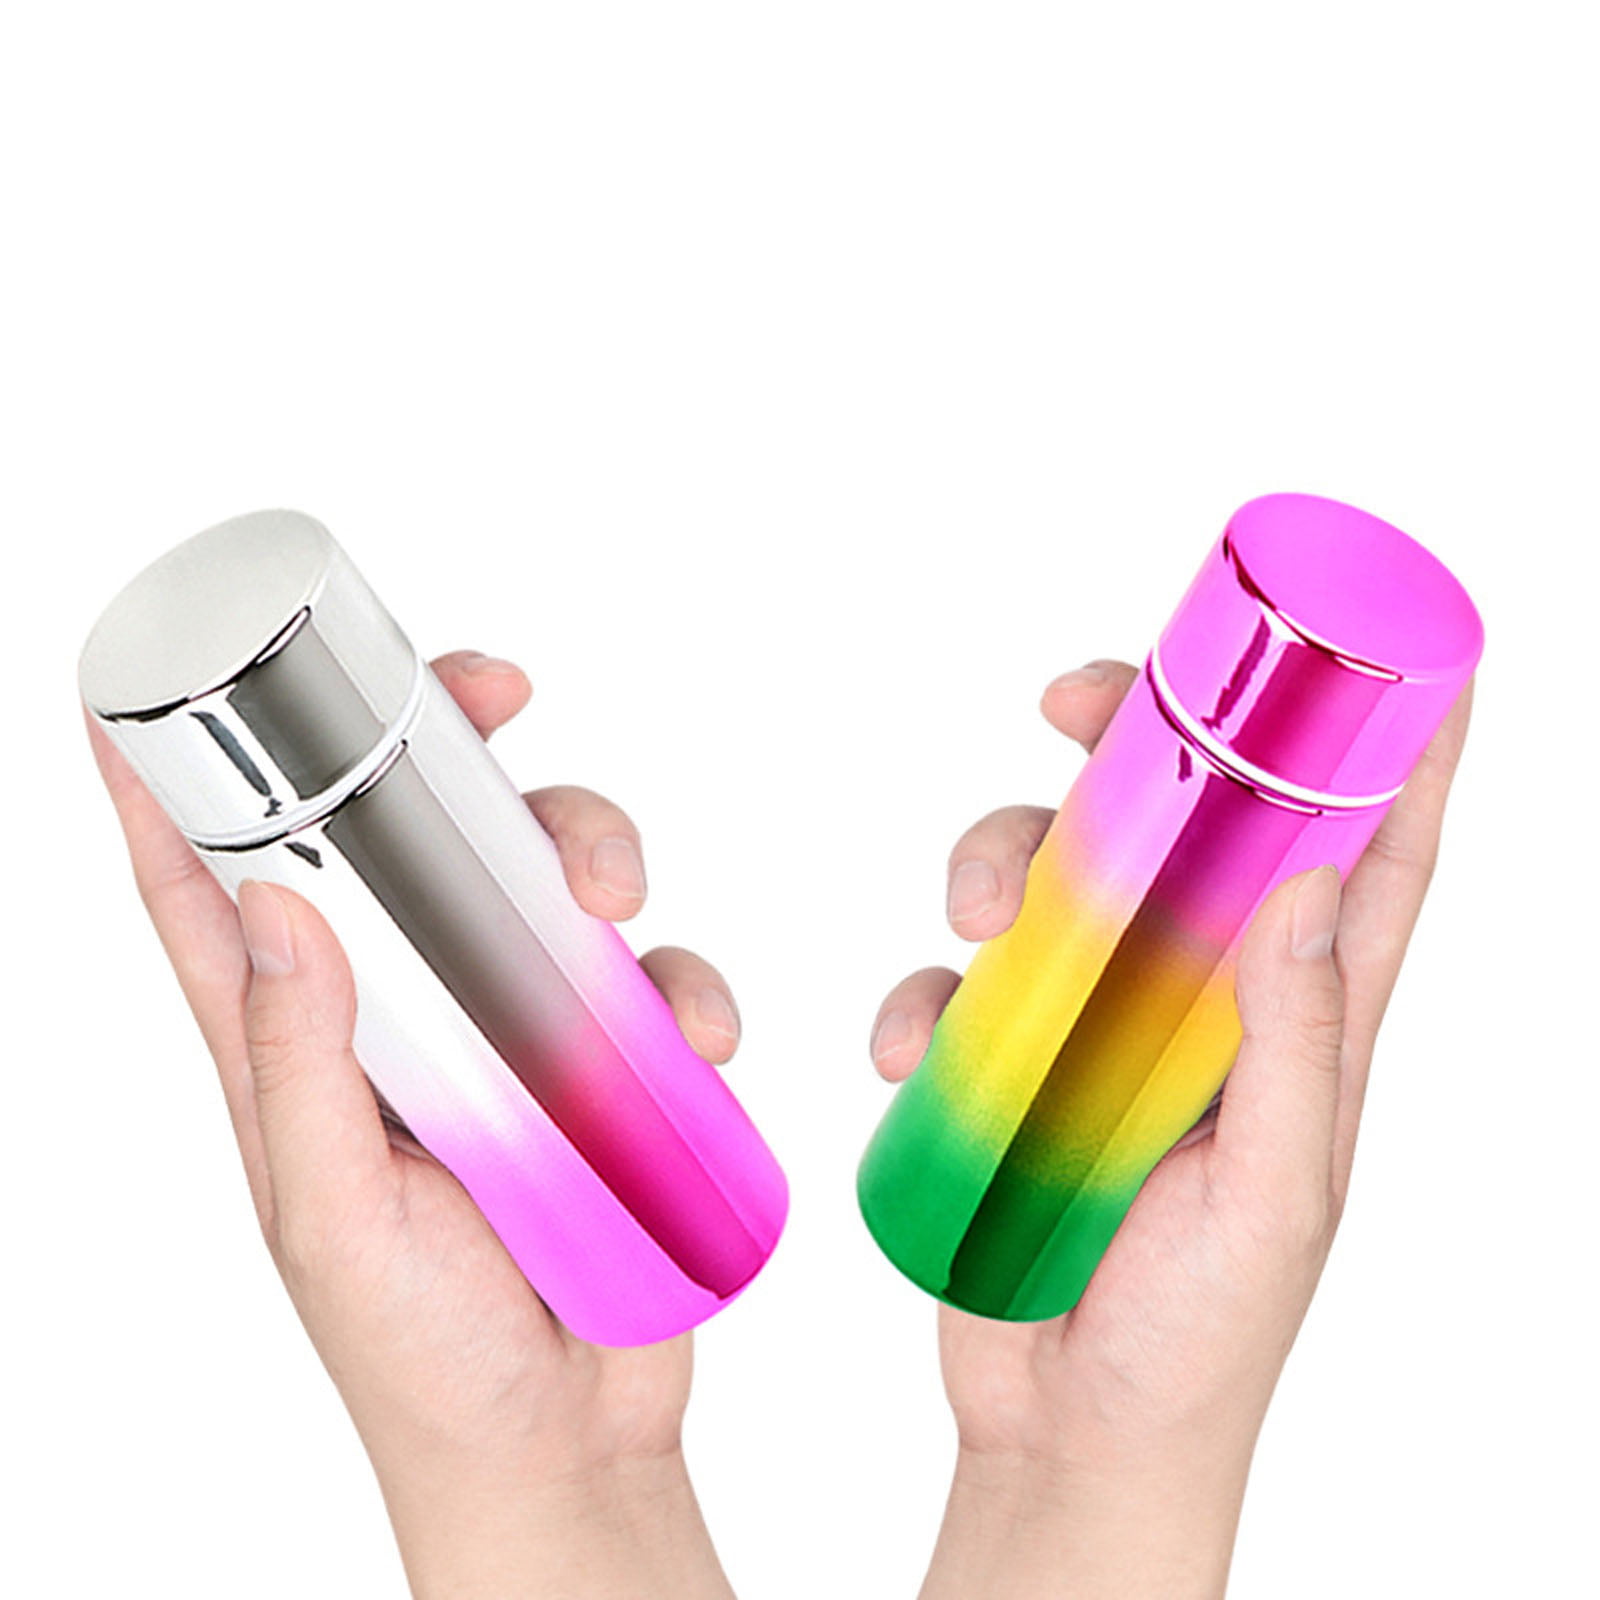 Mini Thermos and Cups Set